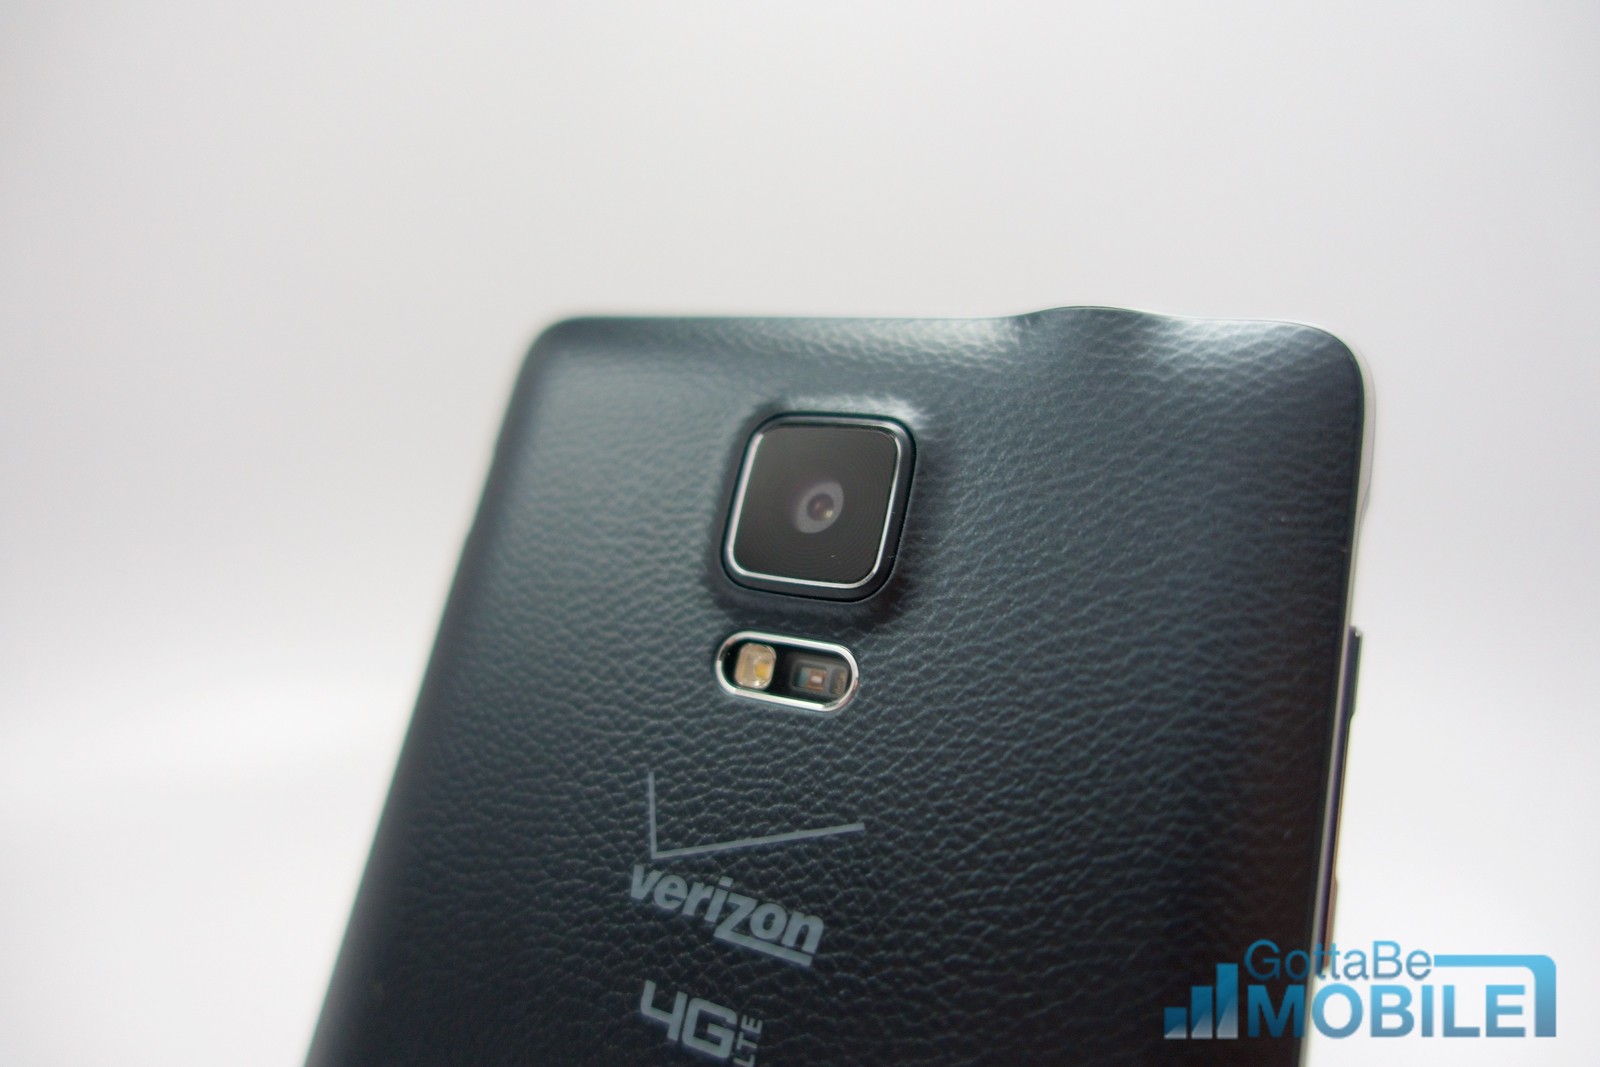 Expect a Galaxy S6 camera upgrade from the S5.